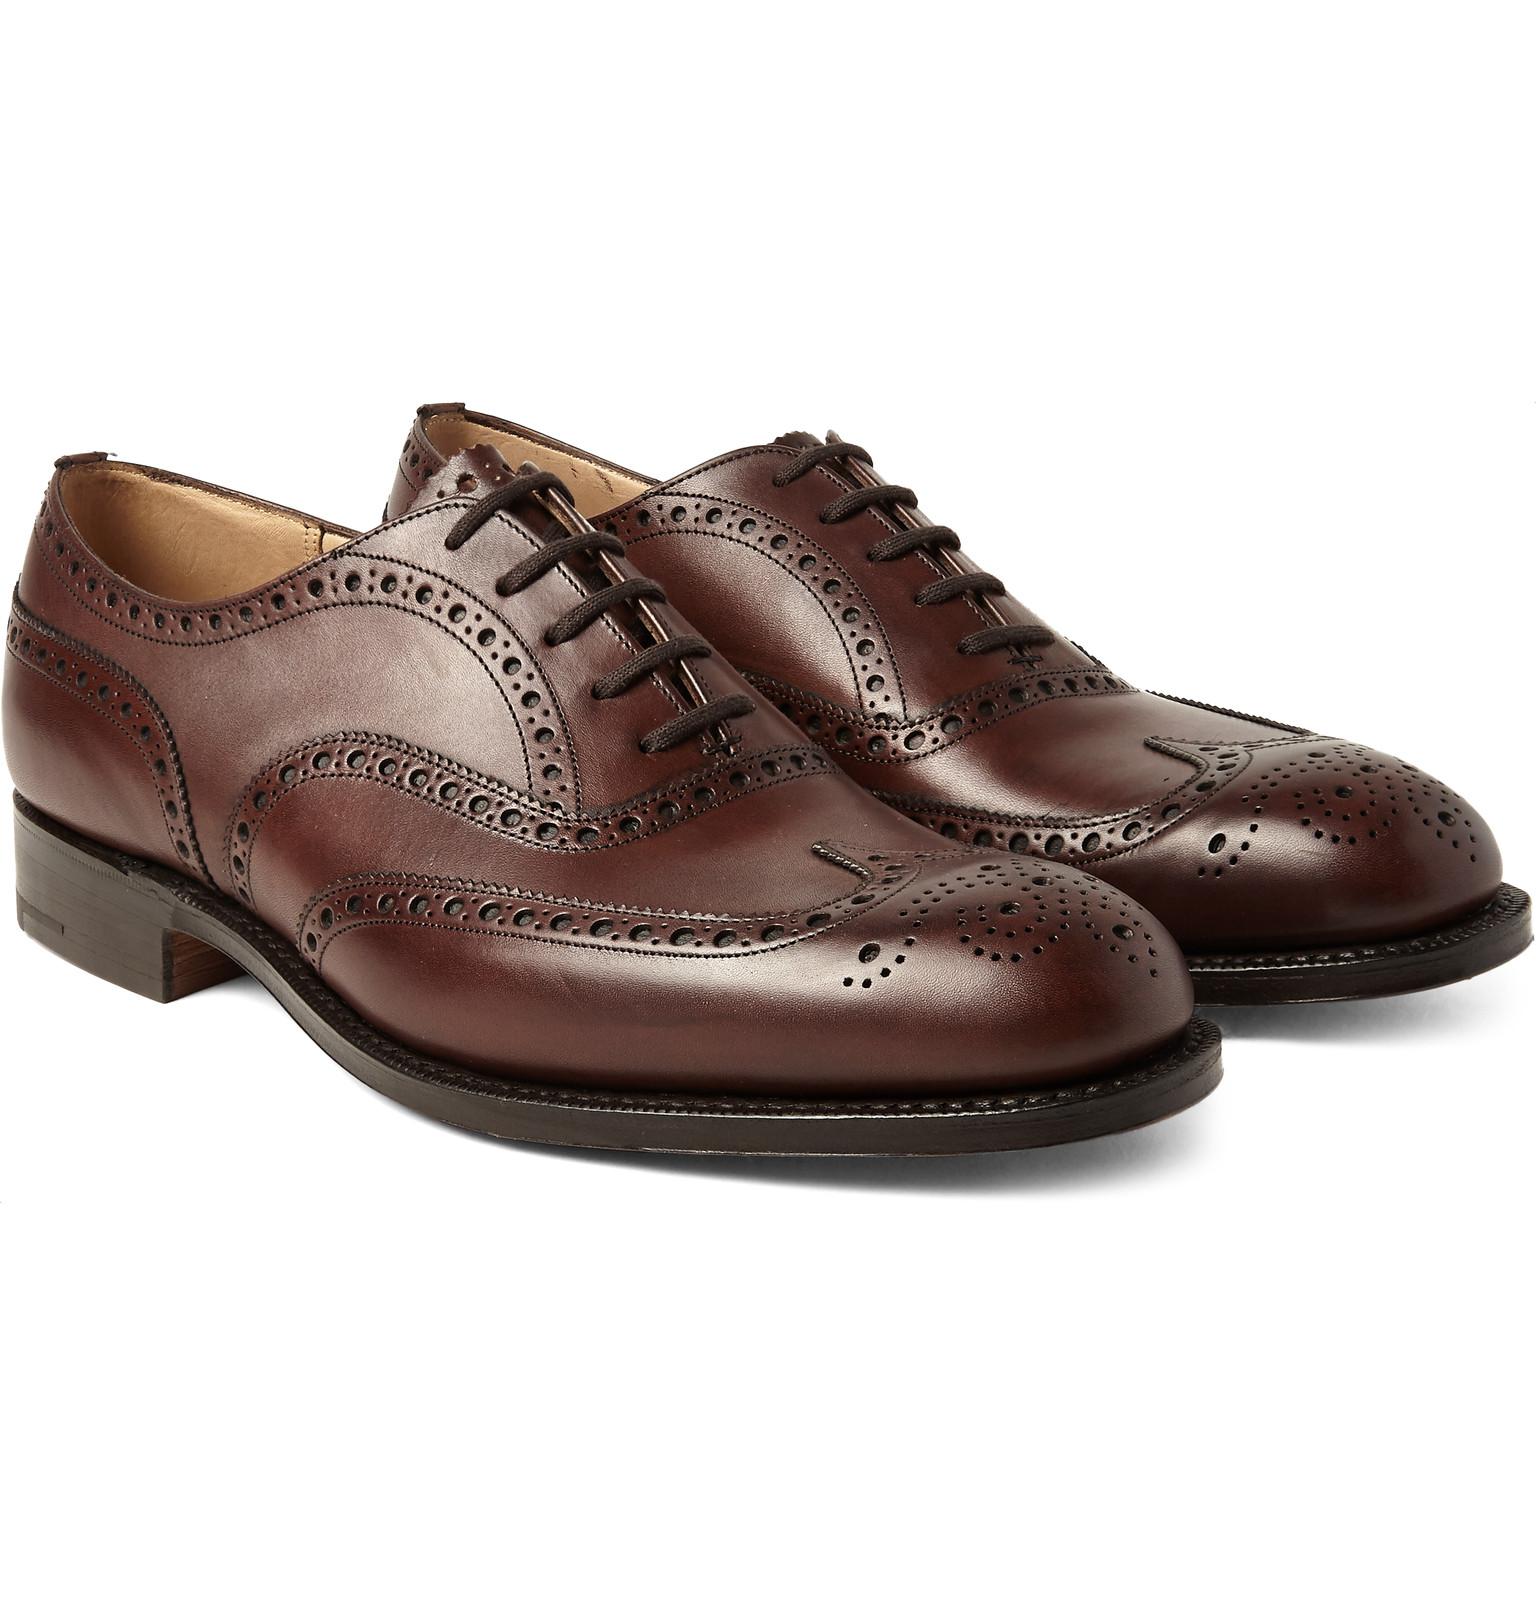 Church's Chetwynd Leather Oxford Brogues in Brown for Men - Lyst